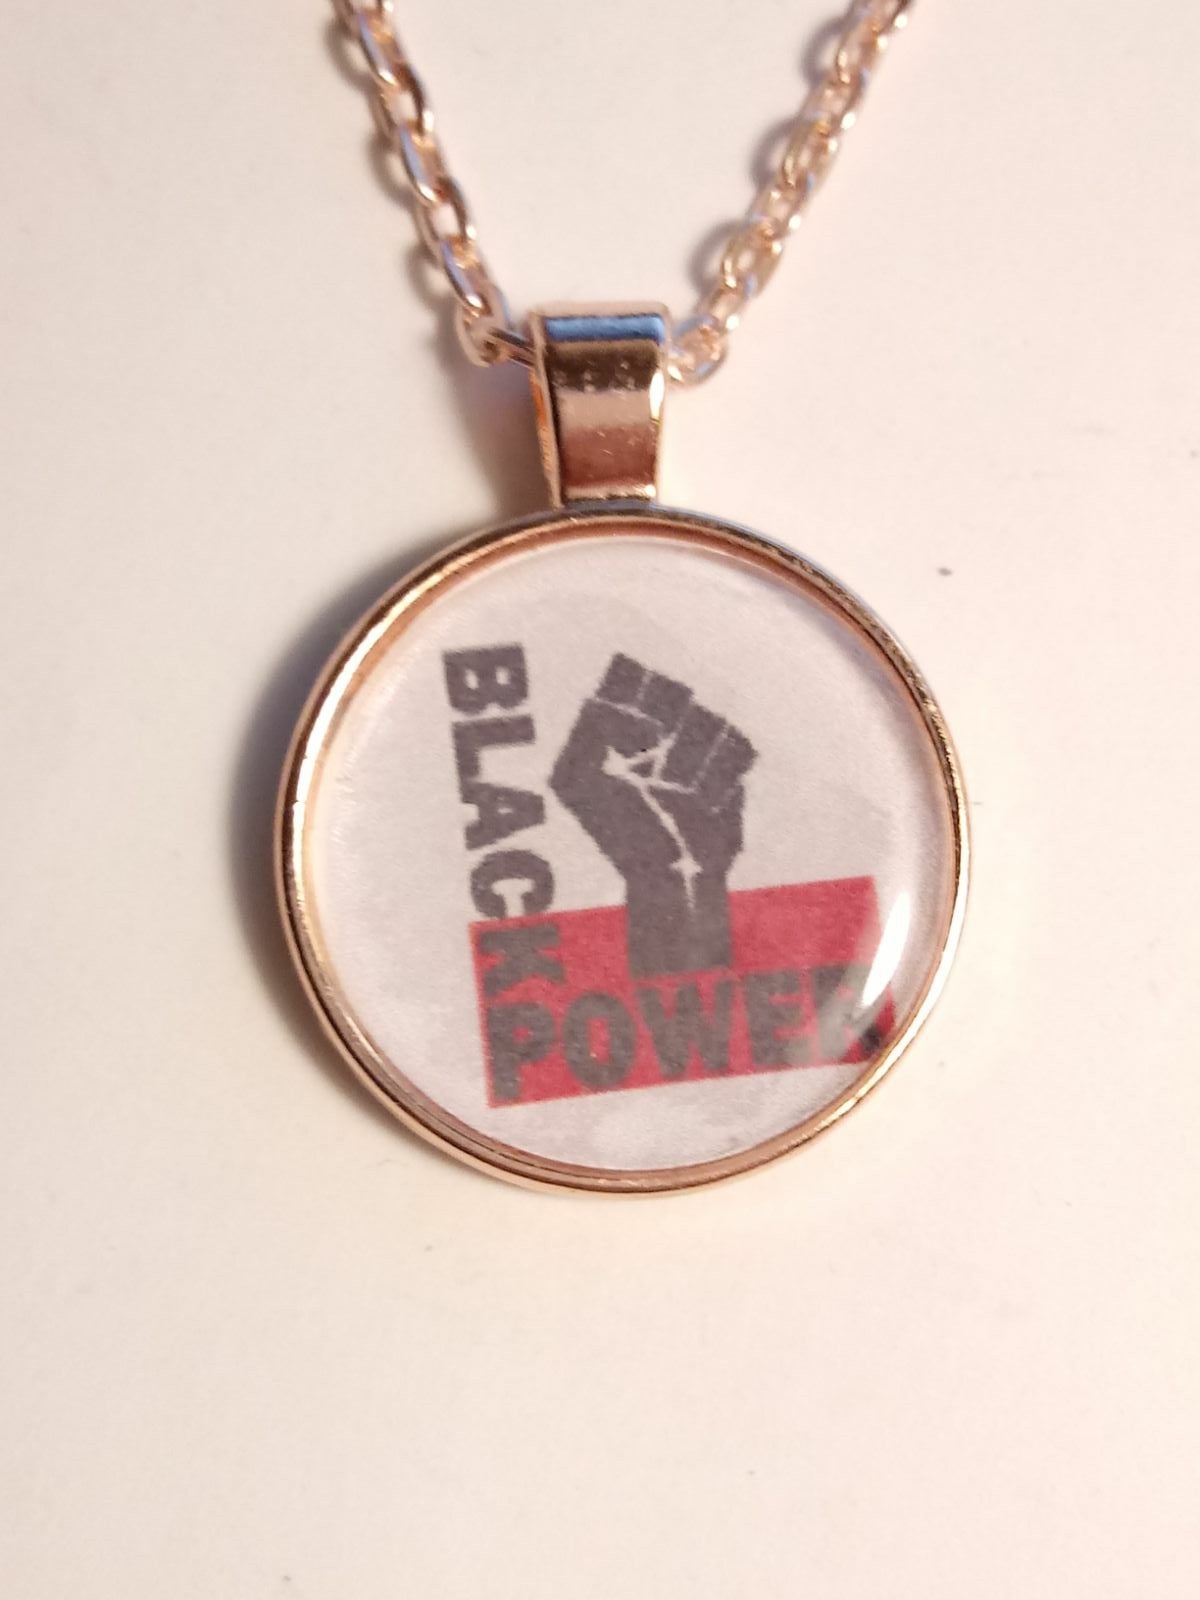 Black Power Raised Fist Peaceful Protest Necklace